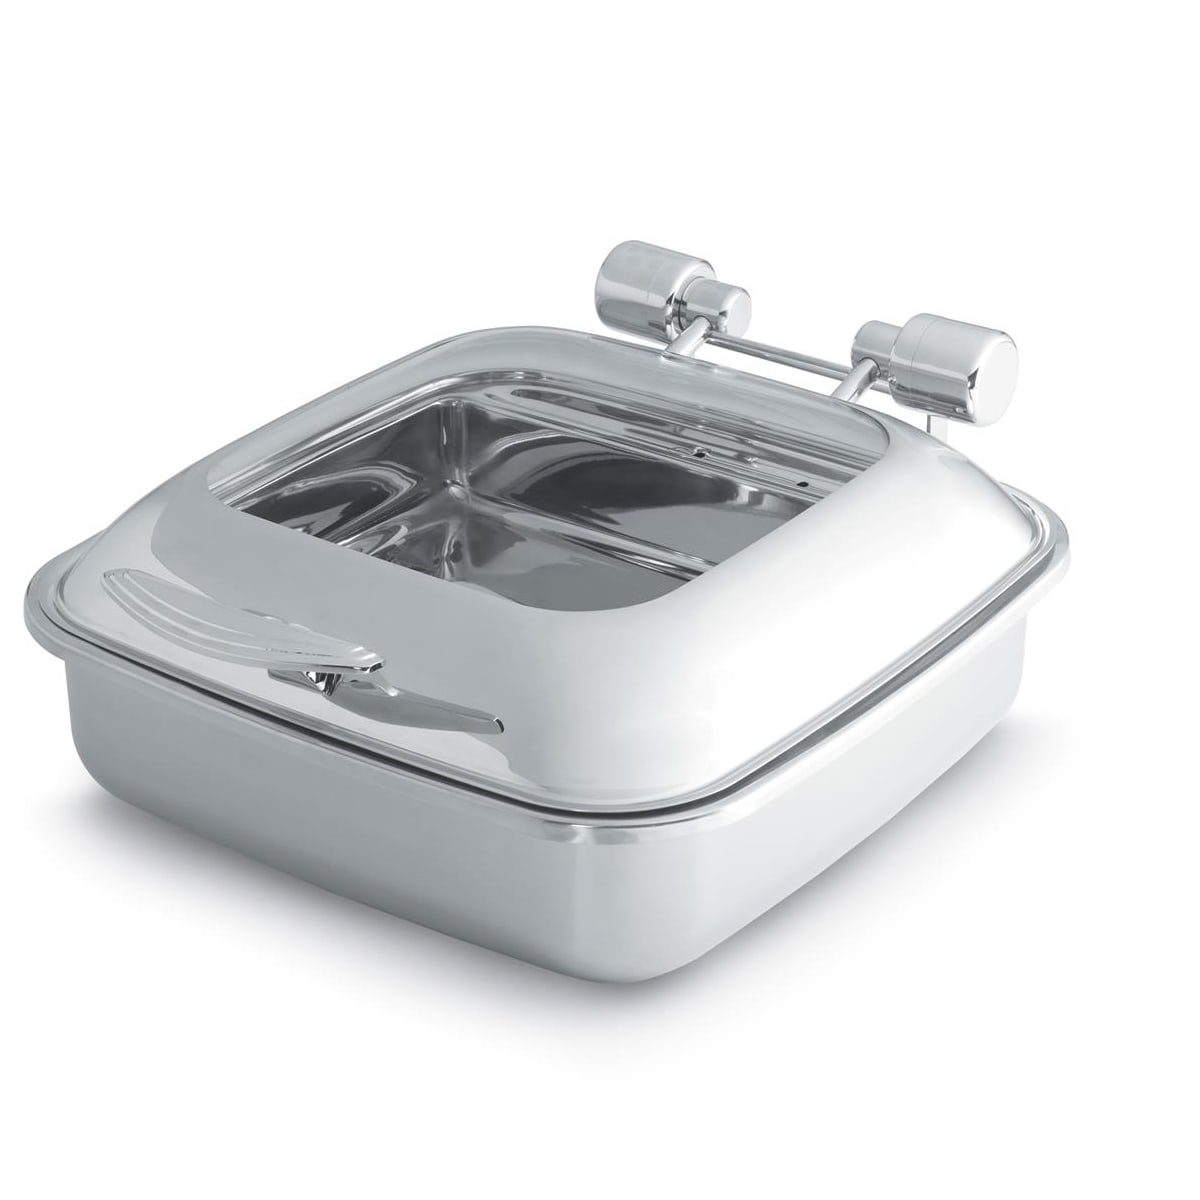 Vollrath 46134 Intrigue™ S/S 6 Quart Glass Top Induction Chafer